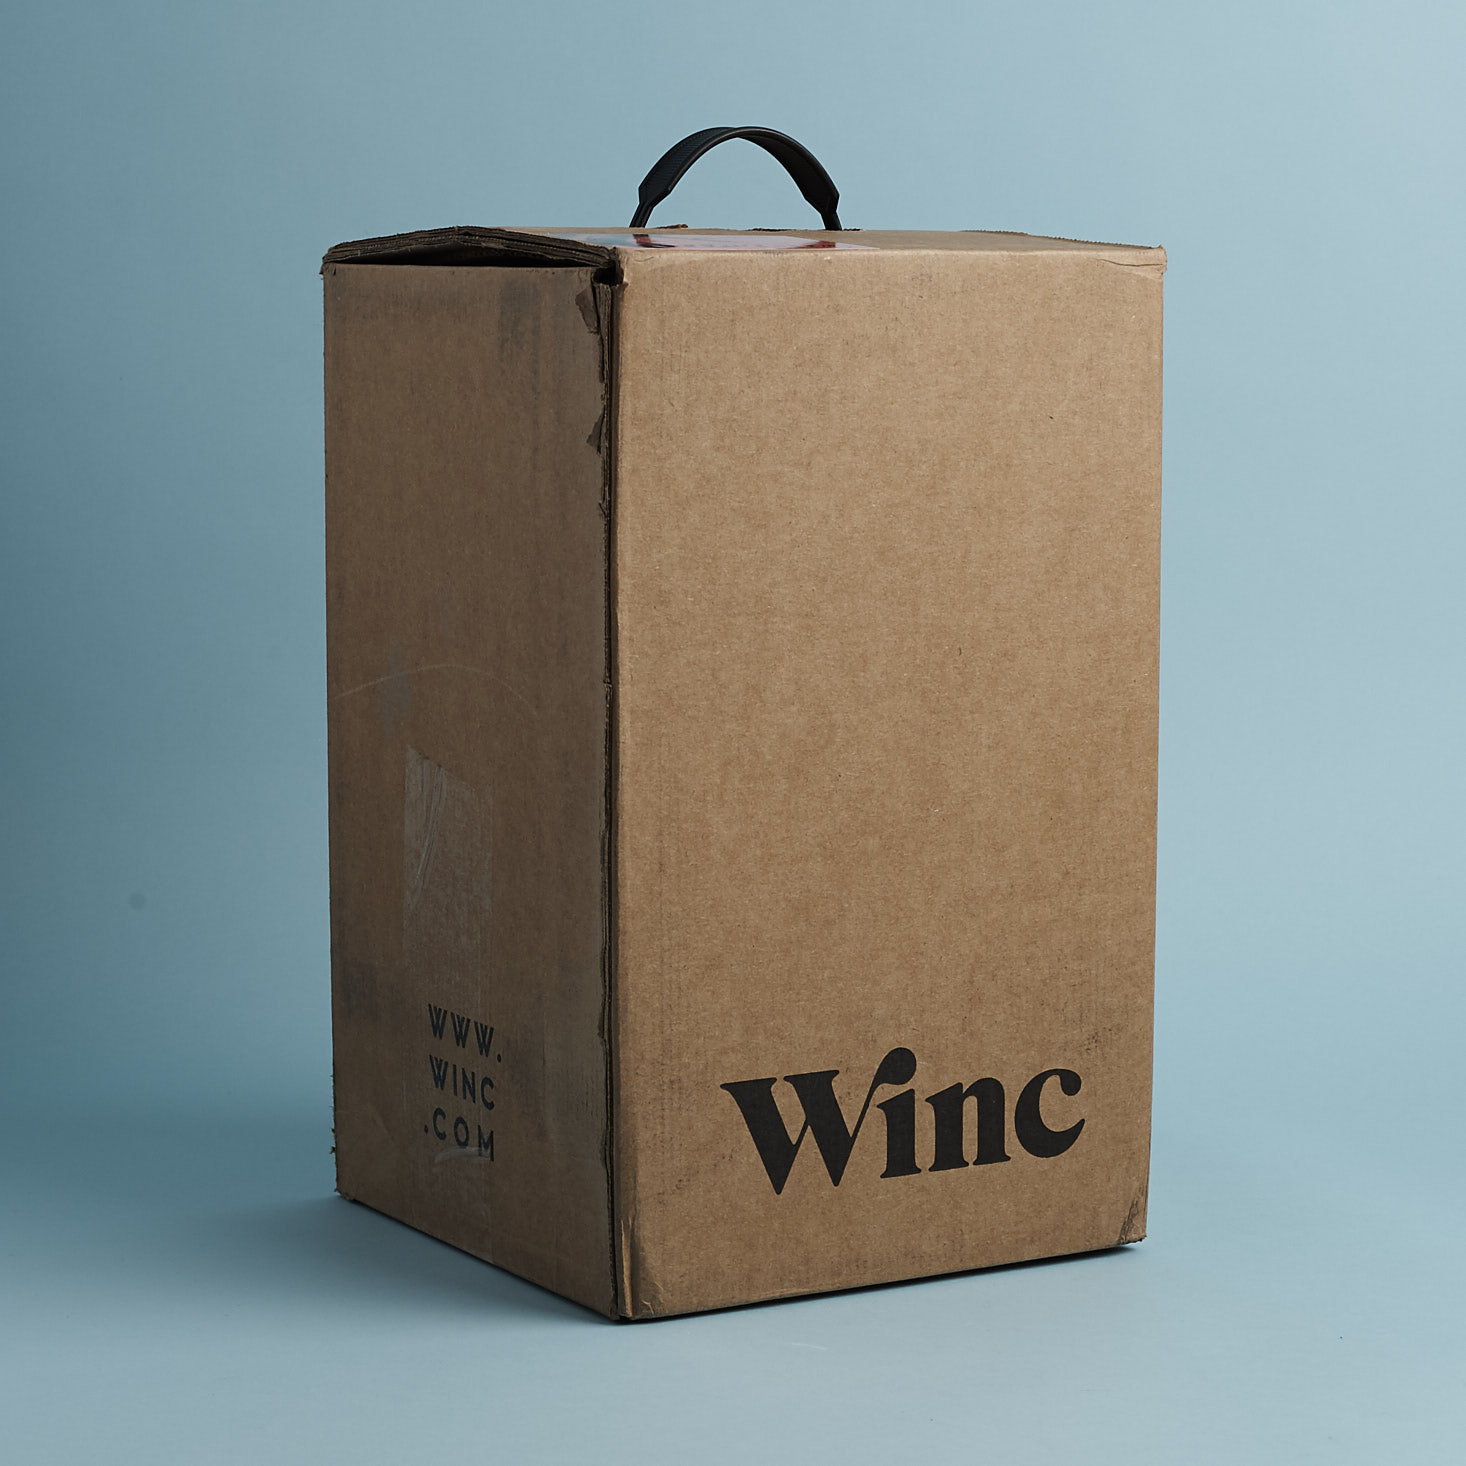 Winc Wine of the Month Review + Coupon – April 2018